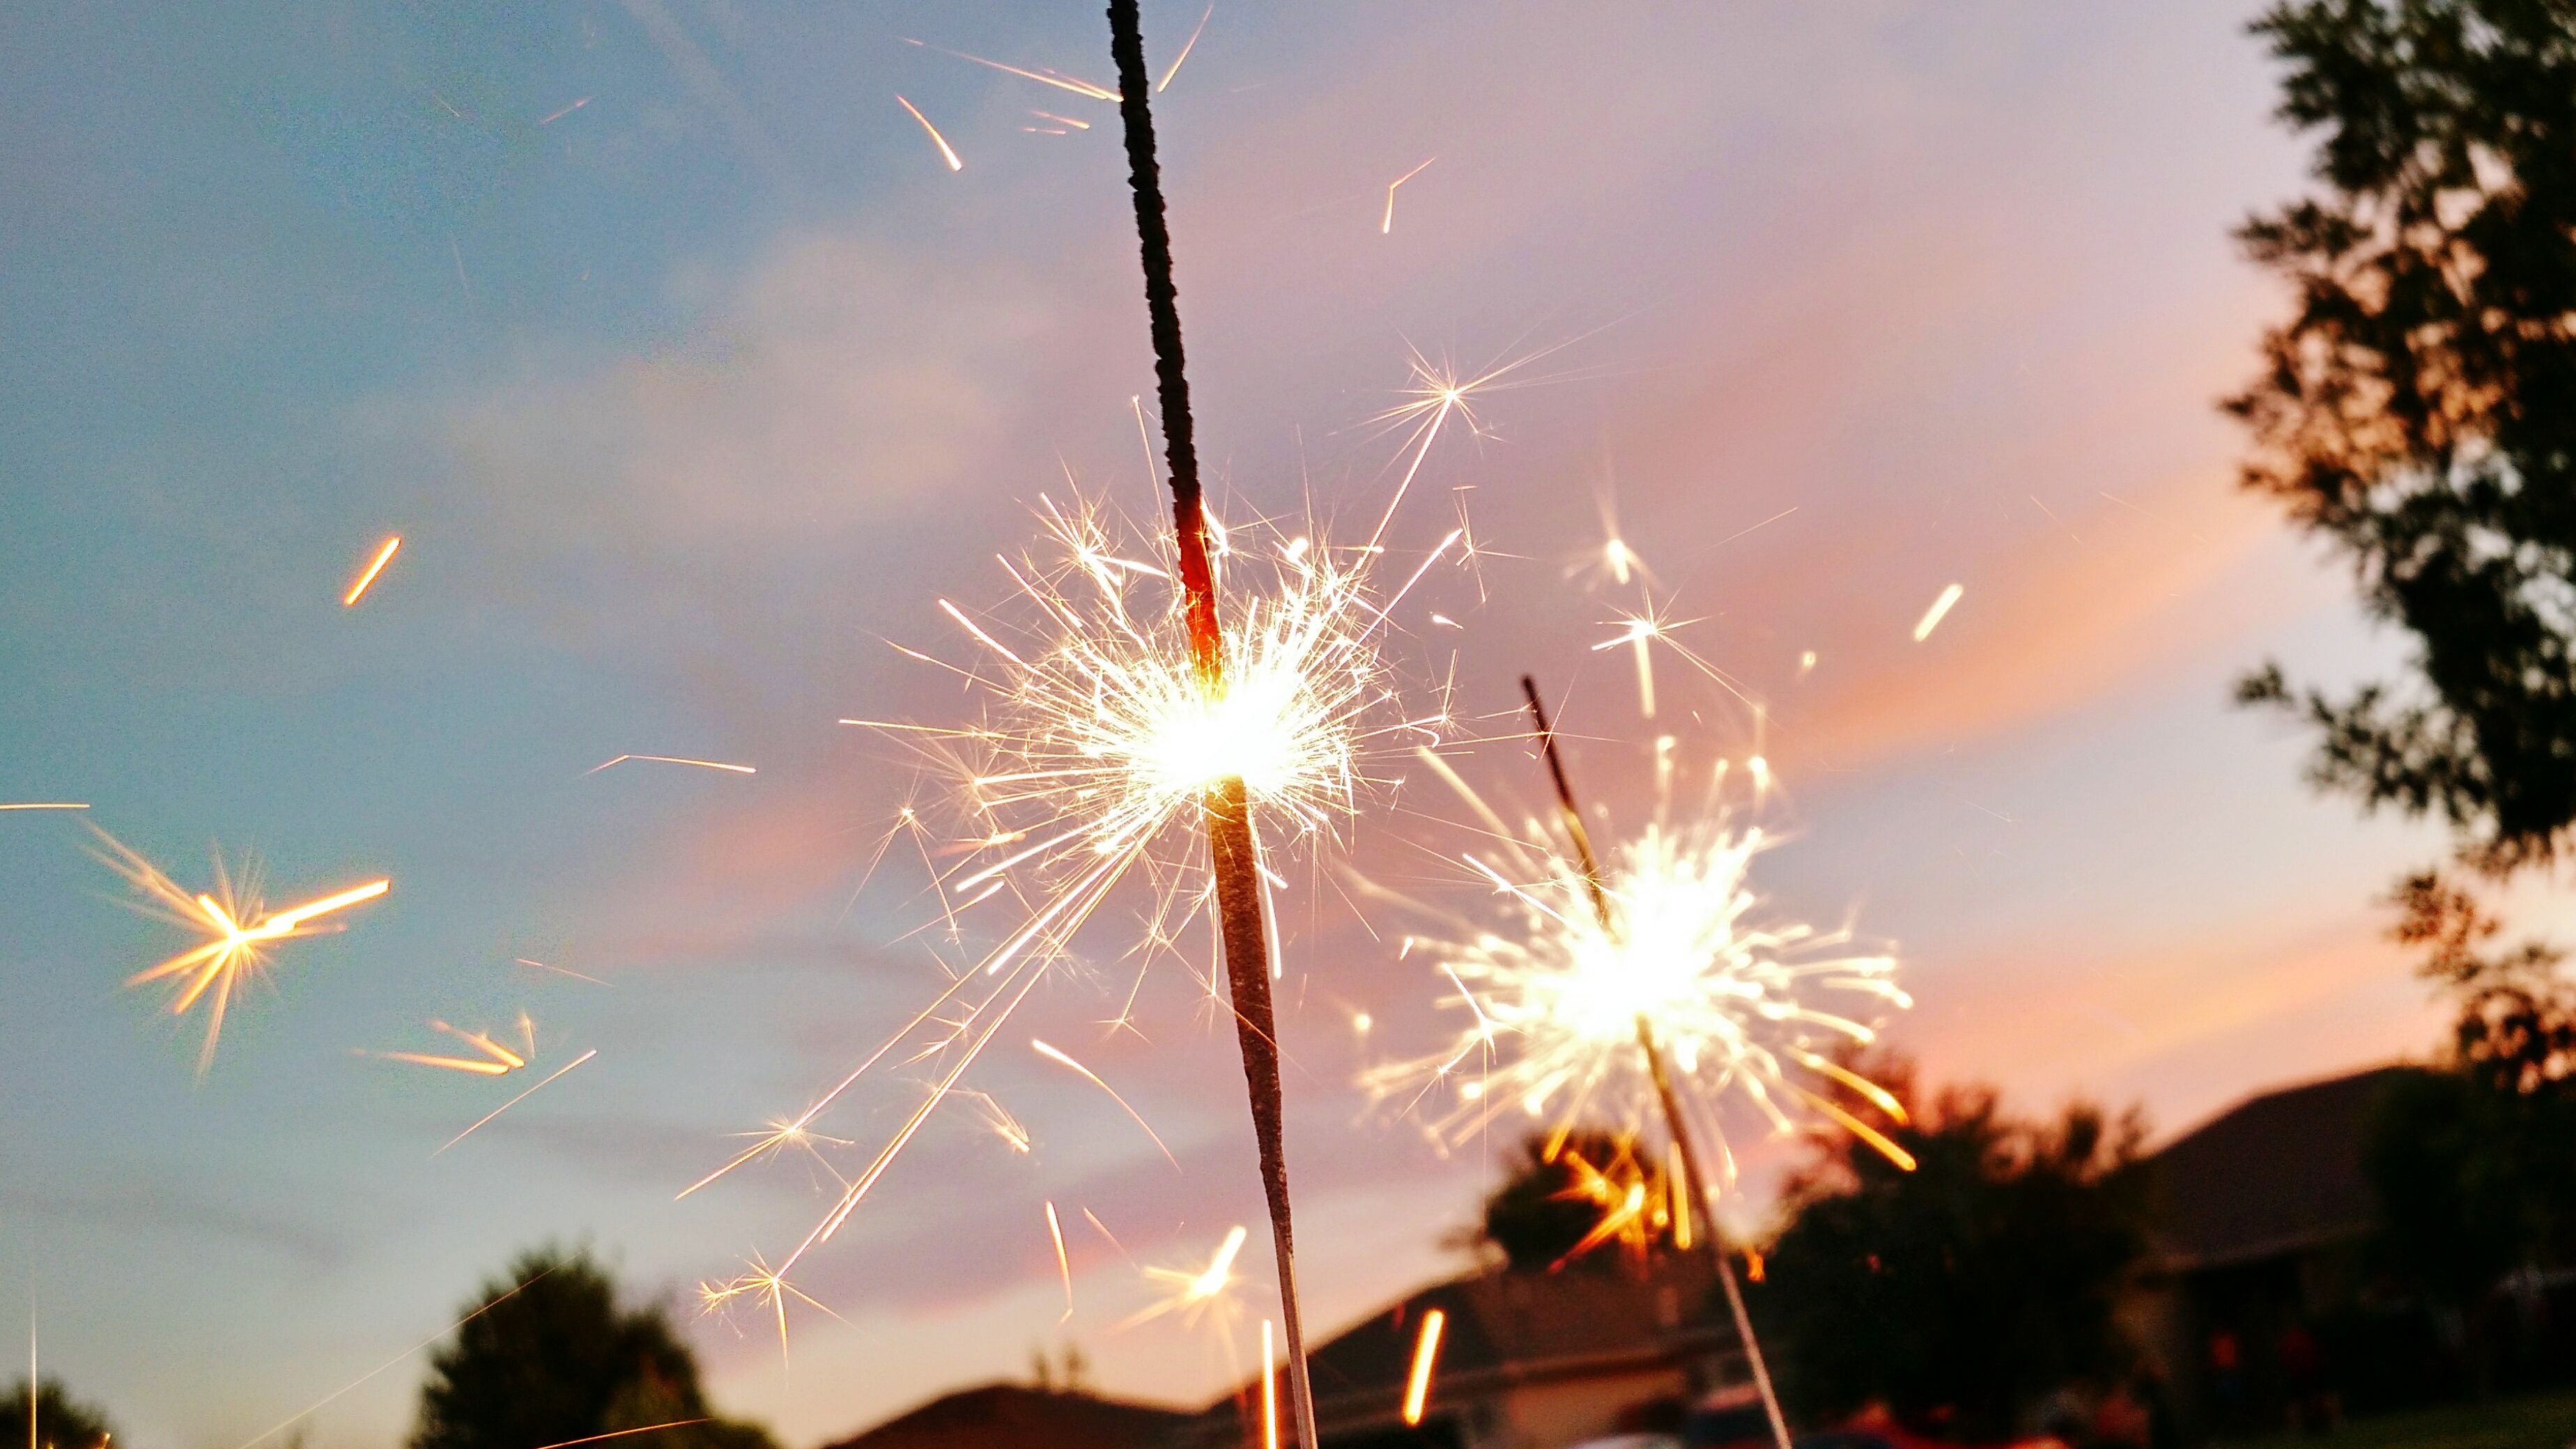 close-up-of-sparkler-against-sky-during-sunset-royalty-free-image-593436249-1559756983